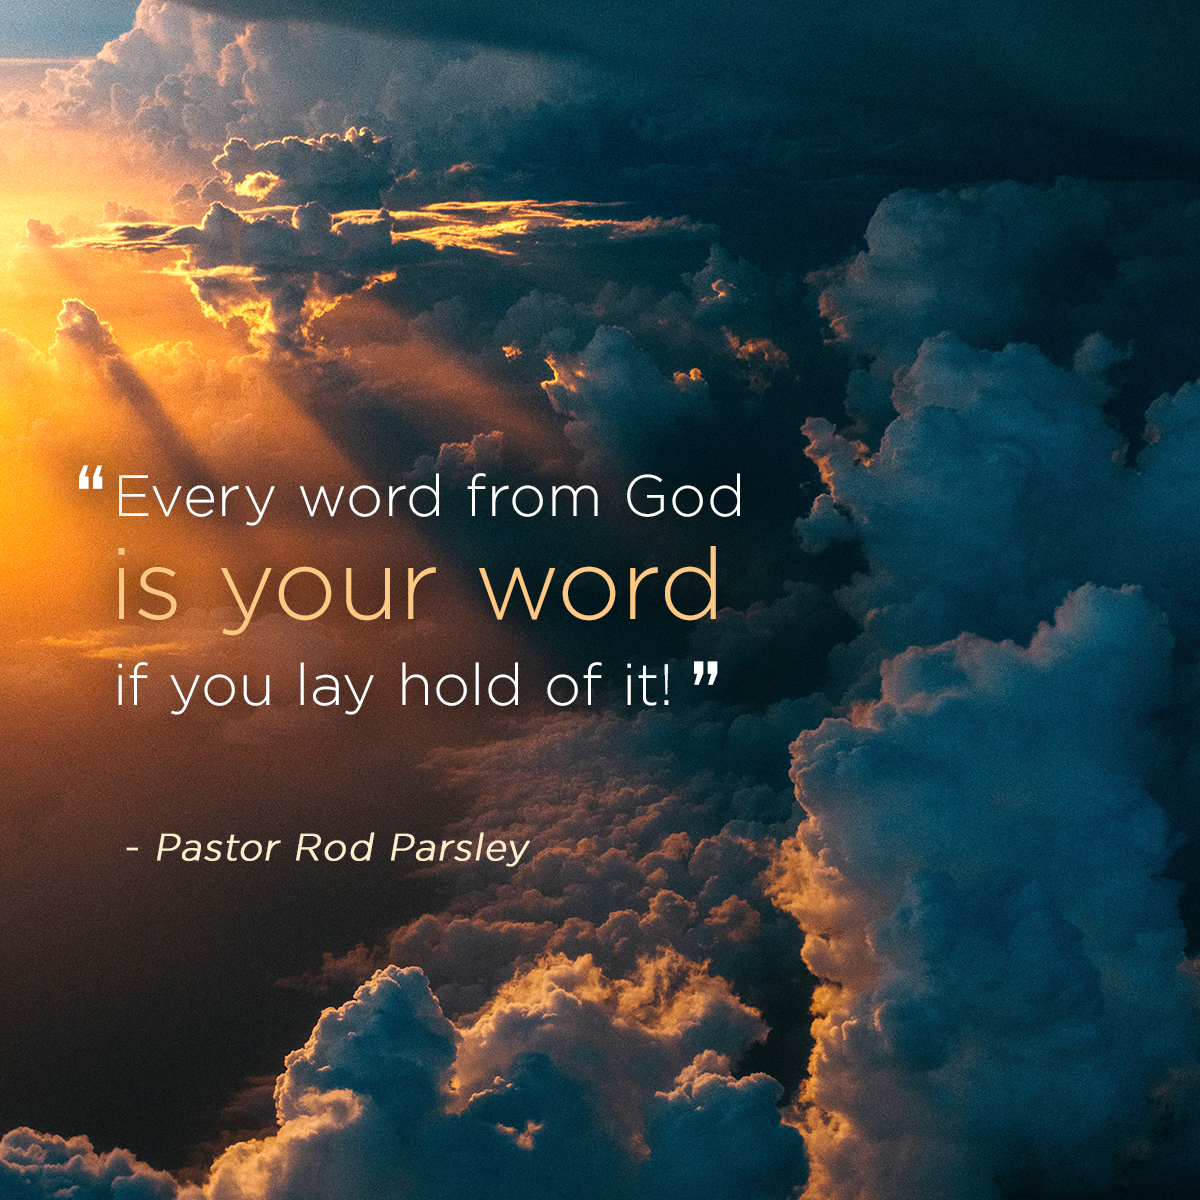 “ Every word from God is your word if you lay hold of it!” – Pastor Rod Parsley